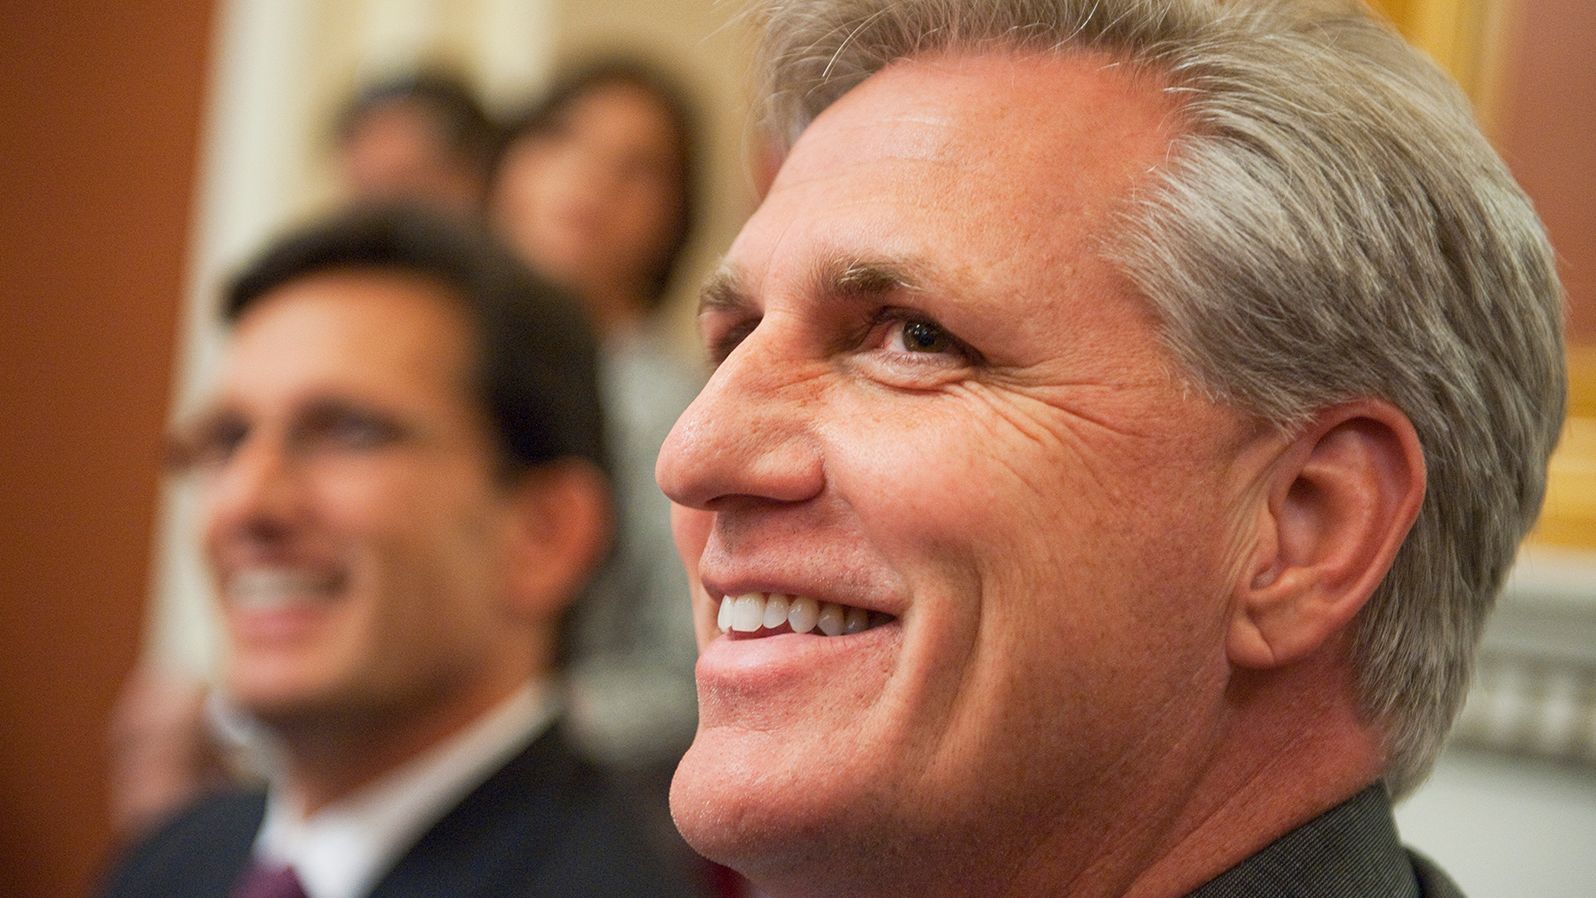 McCarthy and House Majority Leader Eric Cantor brief reporters at the Capitol in September 2011. McCarthy would later succeed Cantor as majority leader in 2014.